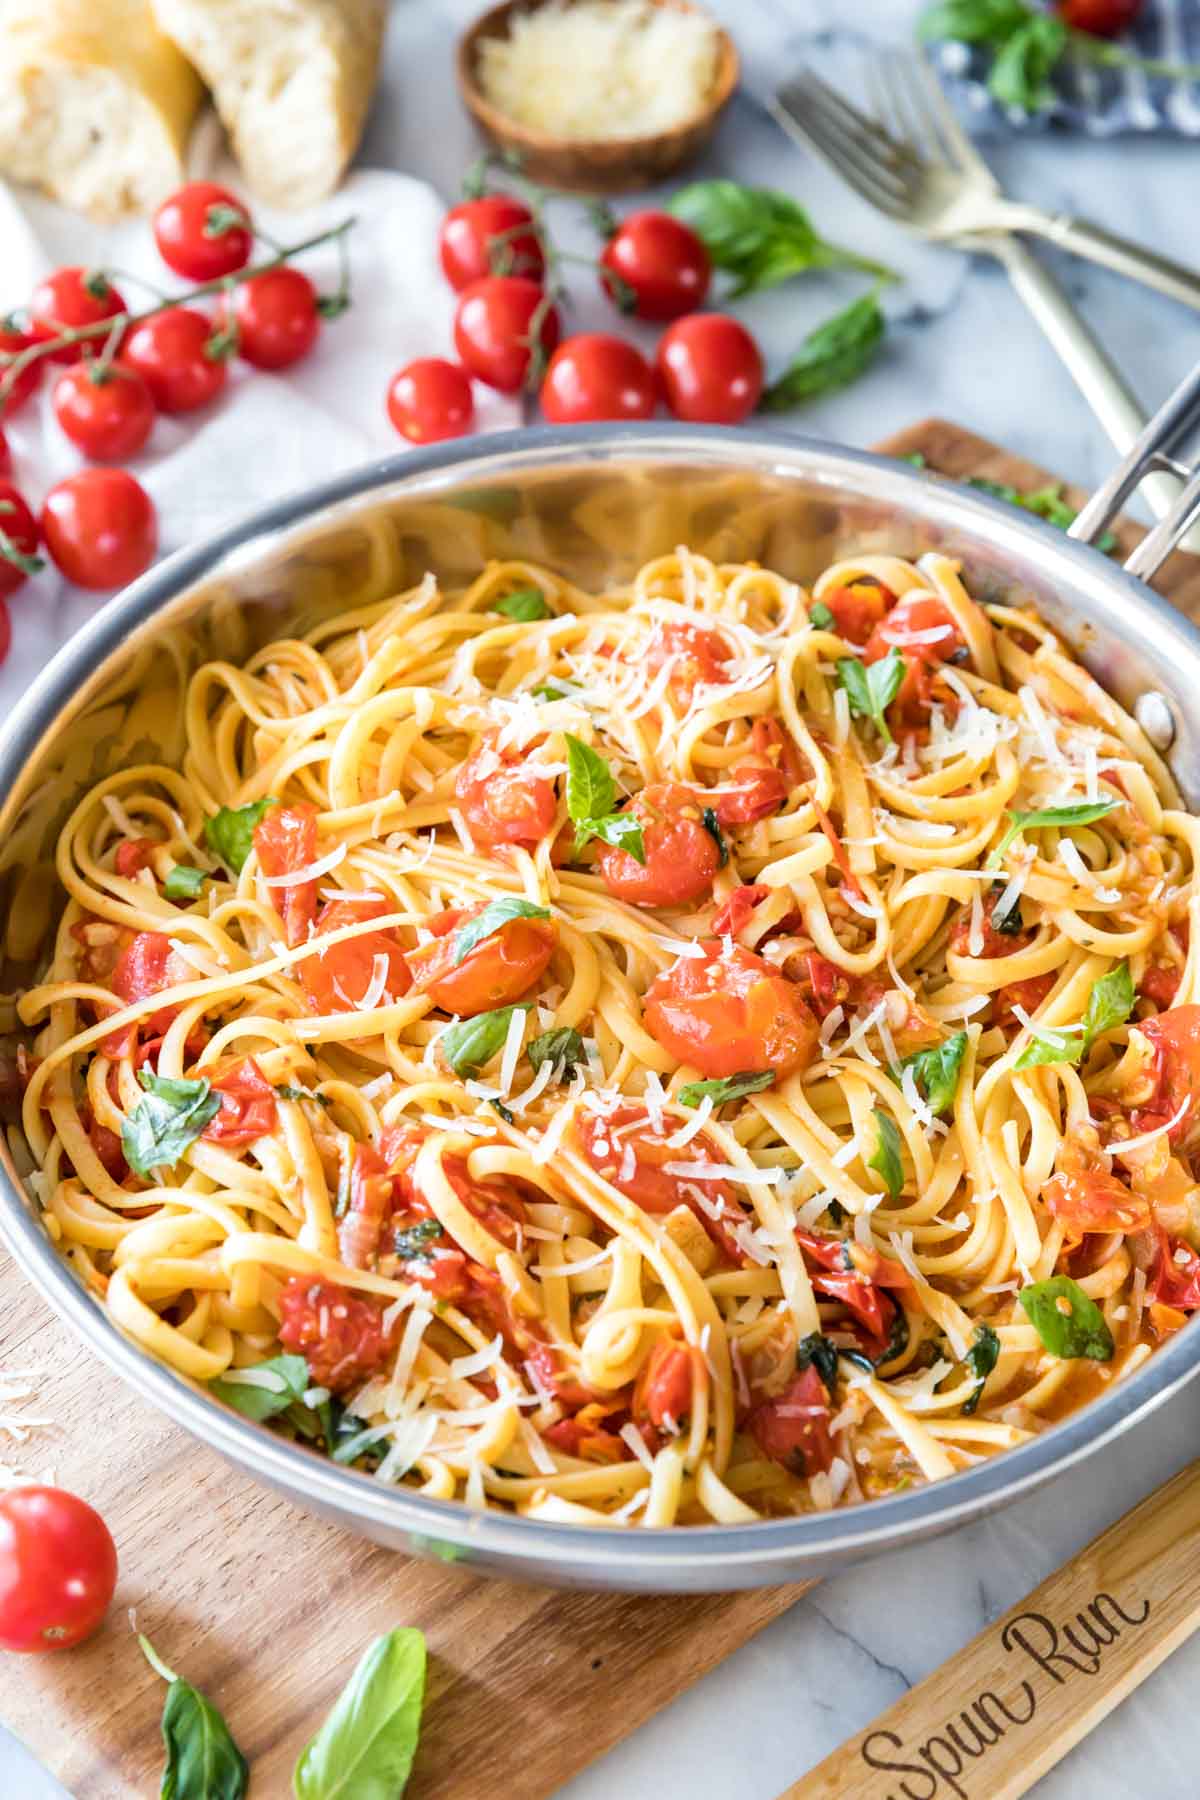 summer pasta with fresh cherry tomatoes and basil served in a stainless steel skillet